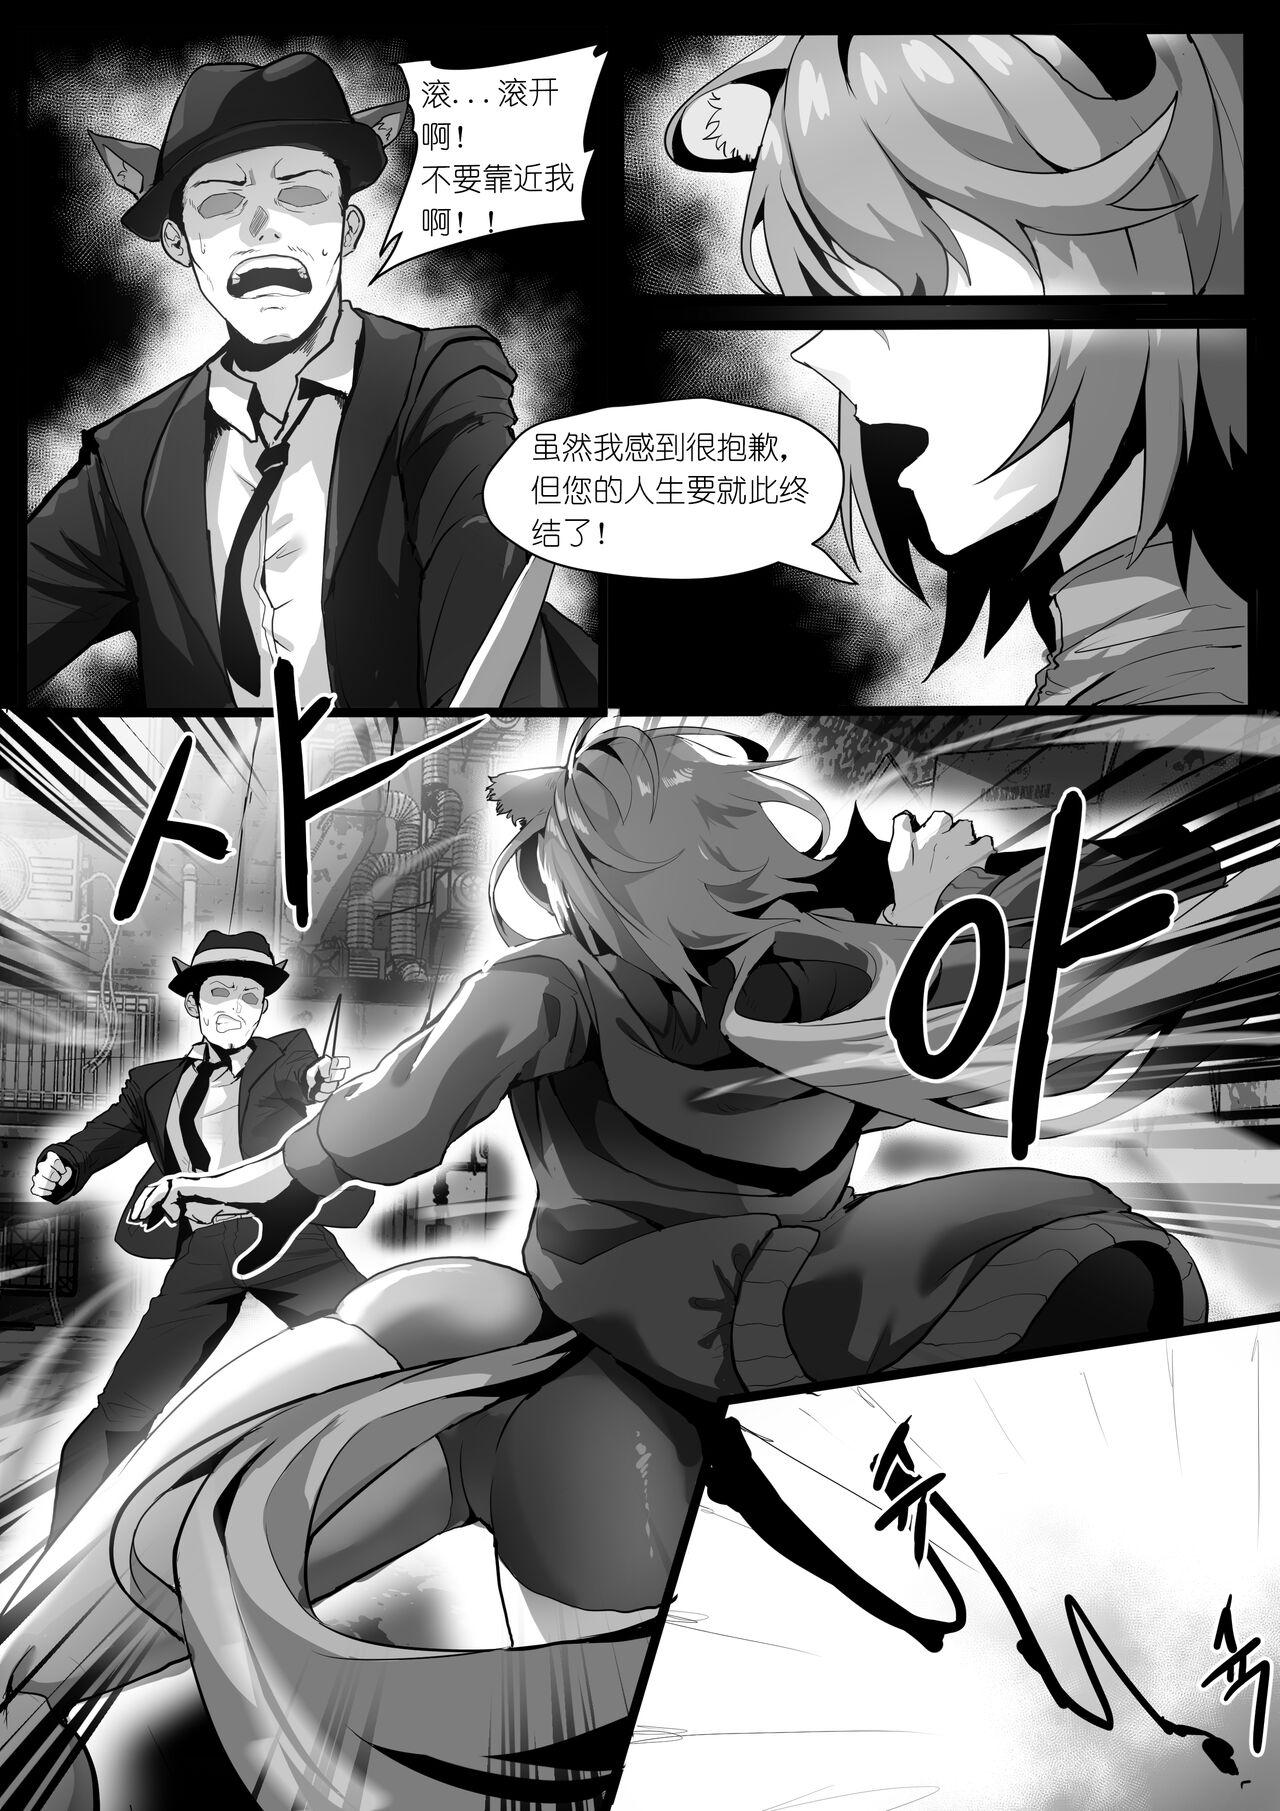 Dicks 欲望方舟记录3 - Arknights Tanned - Page 9